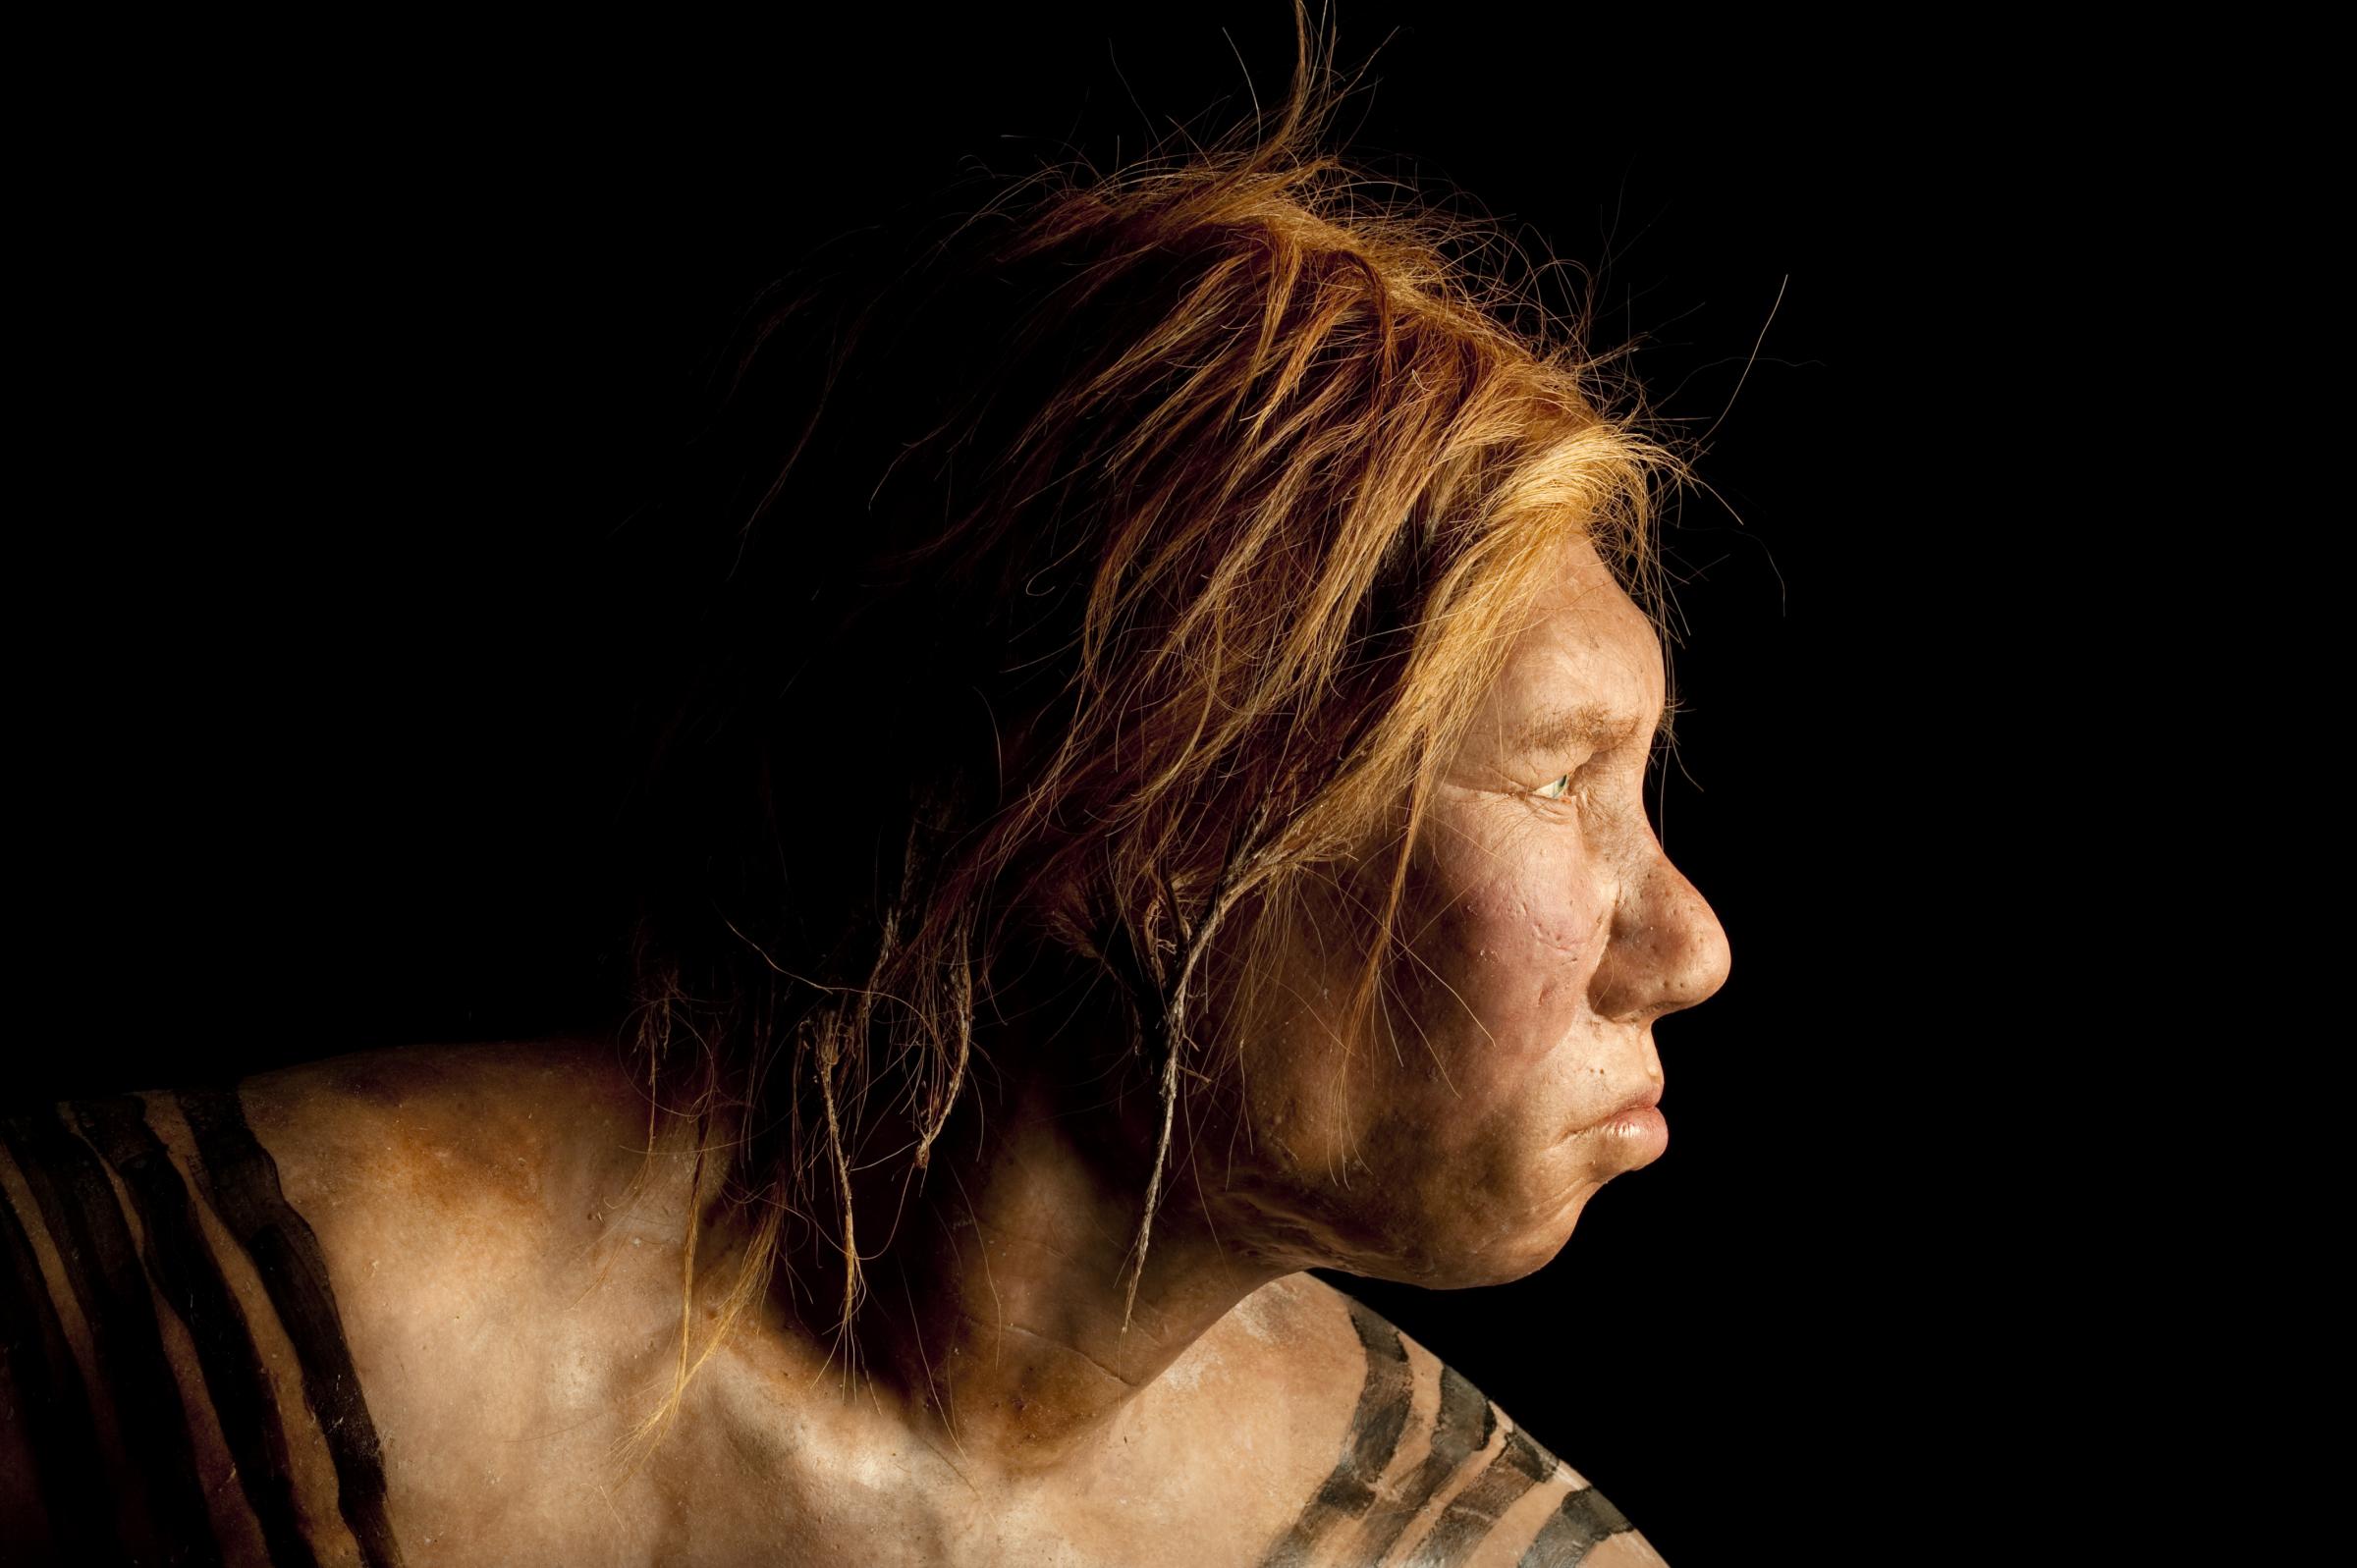 Neanderthals Revealed - The Neanderthal woman as re-created by the Kennis brothers, photographed in and around Asturias, Spain on April 26 & 27, 2008.